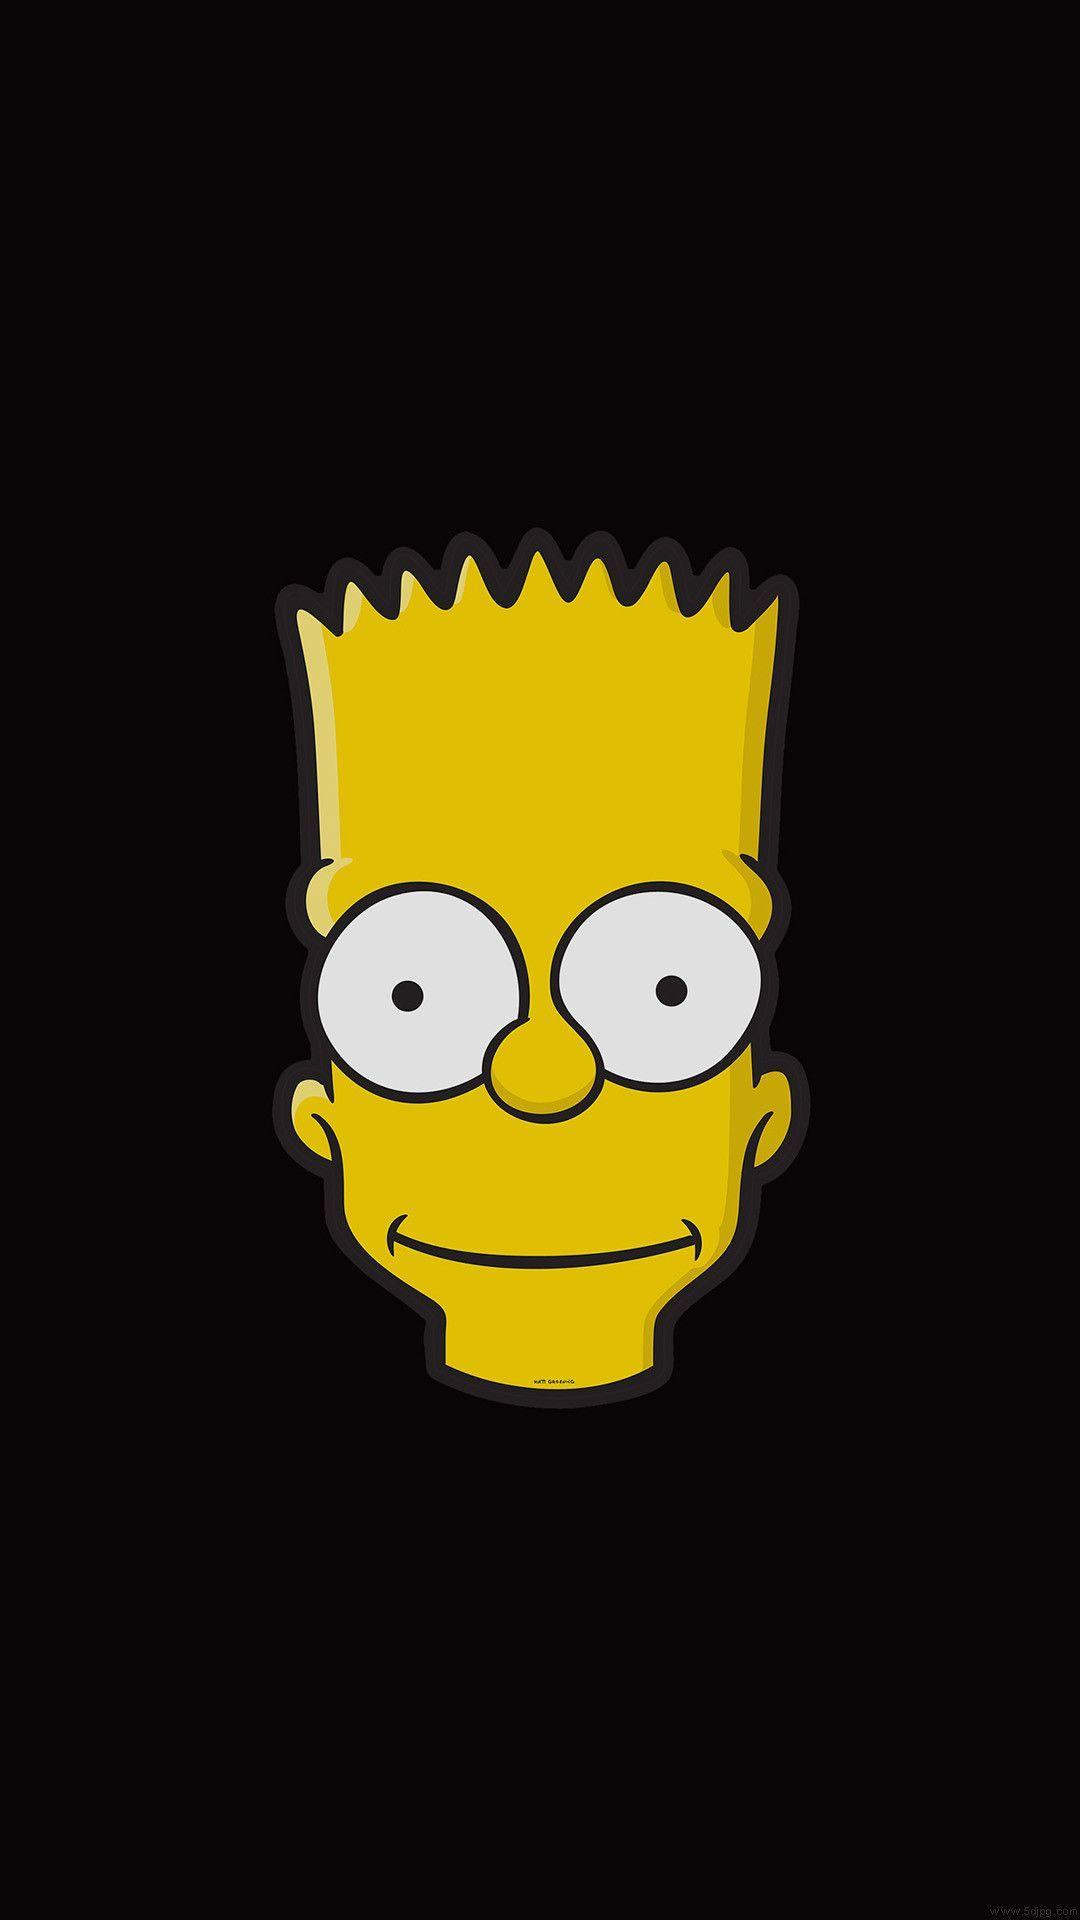 Cool Bart Simpson Wallpapers - Top Free Cool Bart Simpson ...